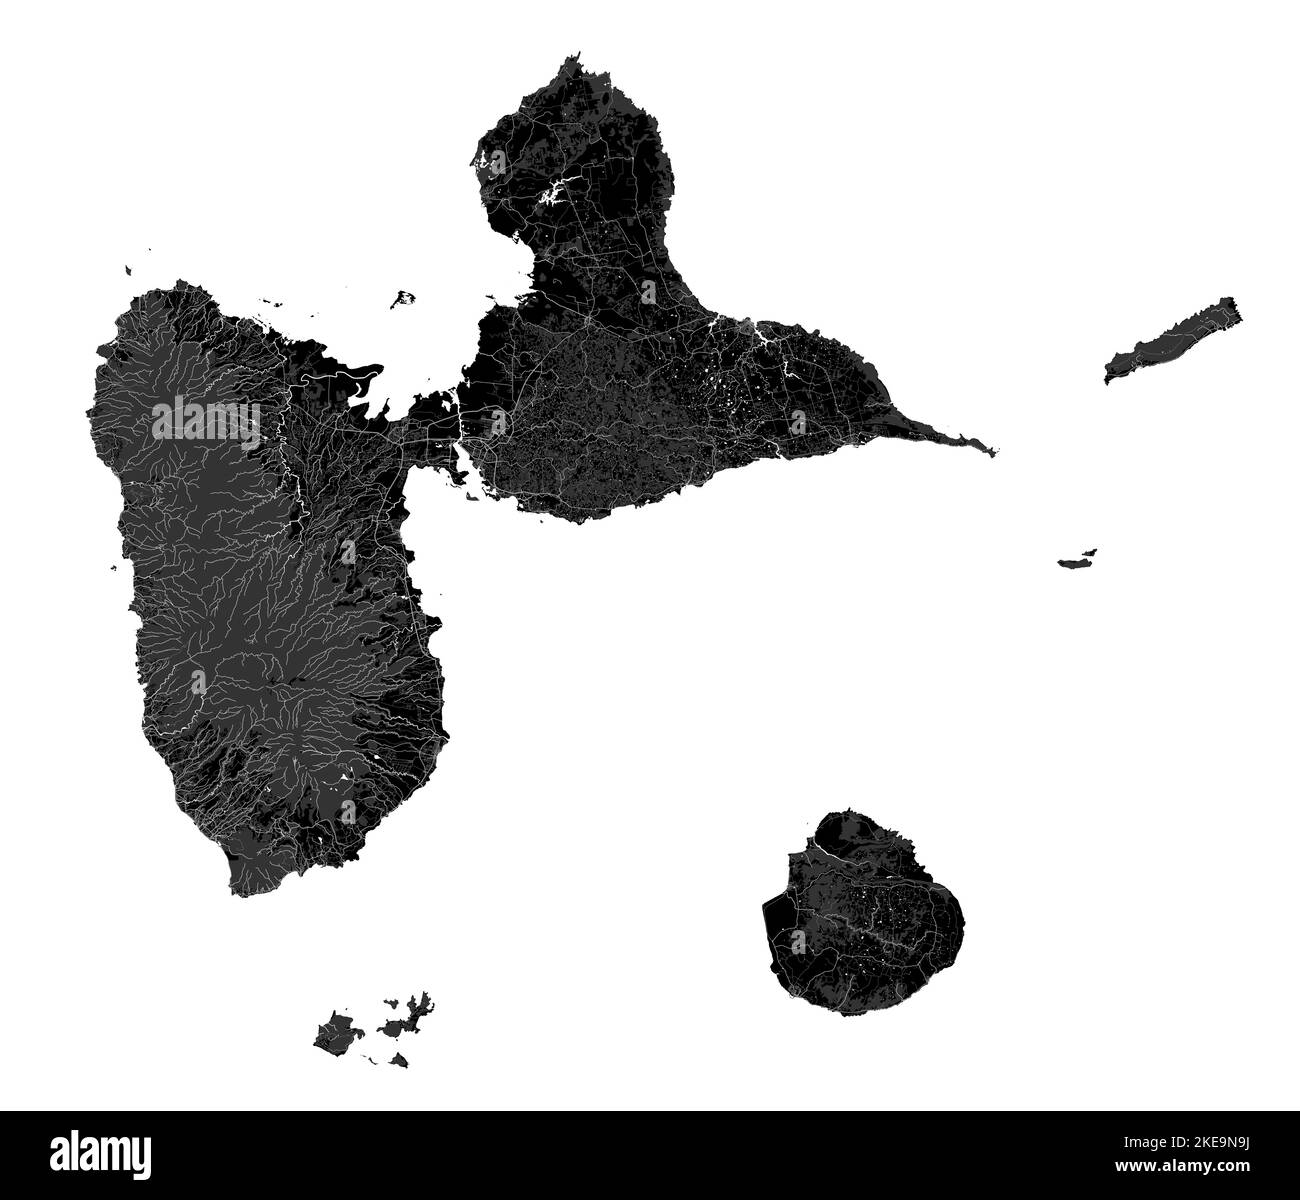 Guadeloupe map, Caribbean islands. Archipelago and overseas department and region of France. Dark black map with rivers, forests, white background. Stock Vector